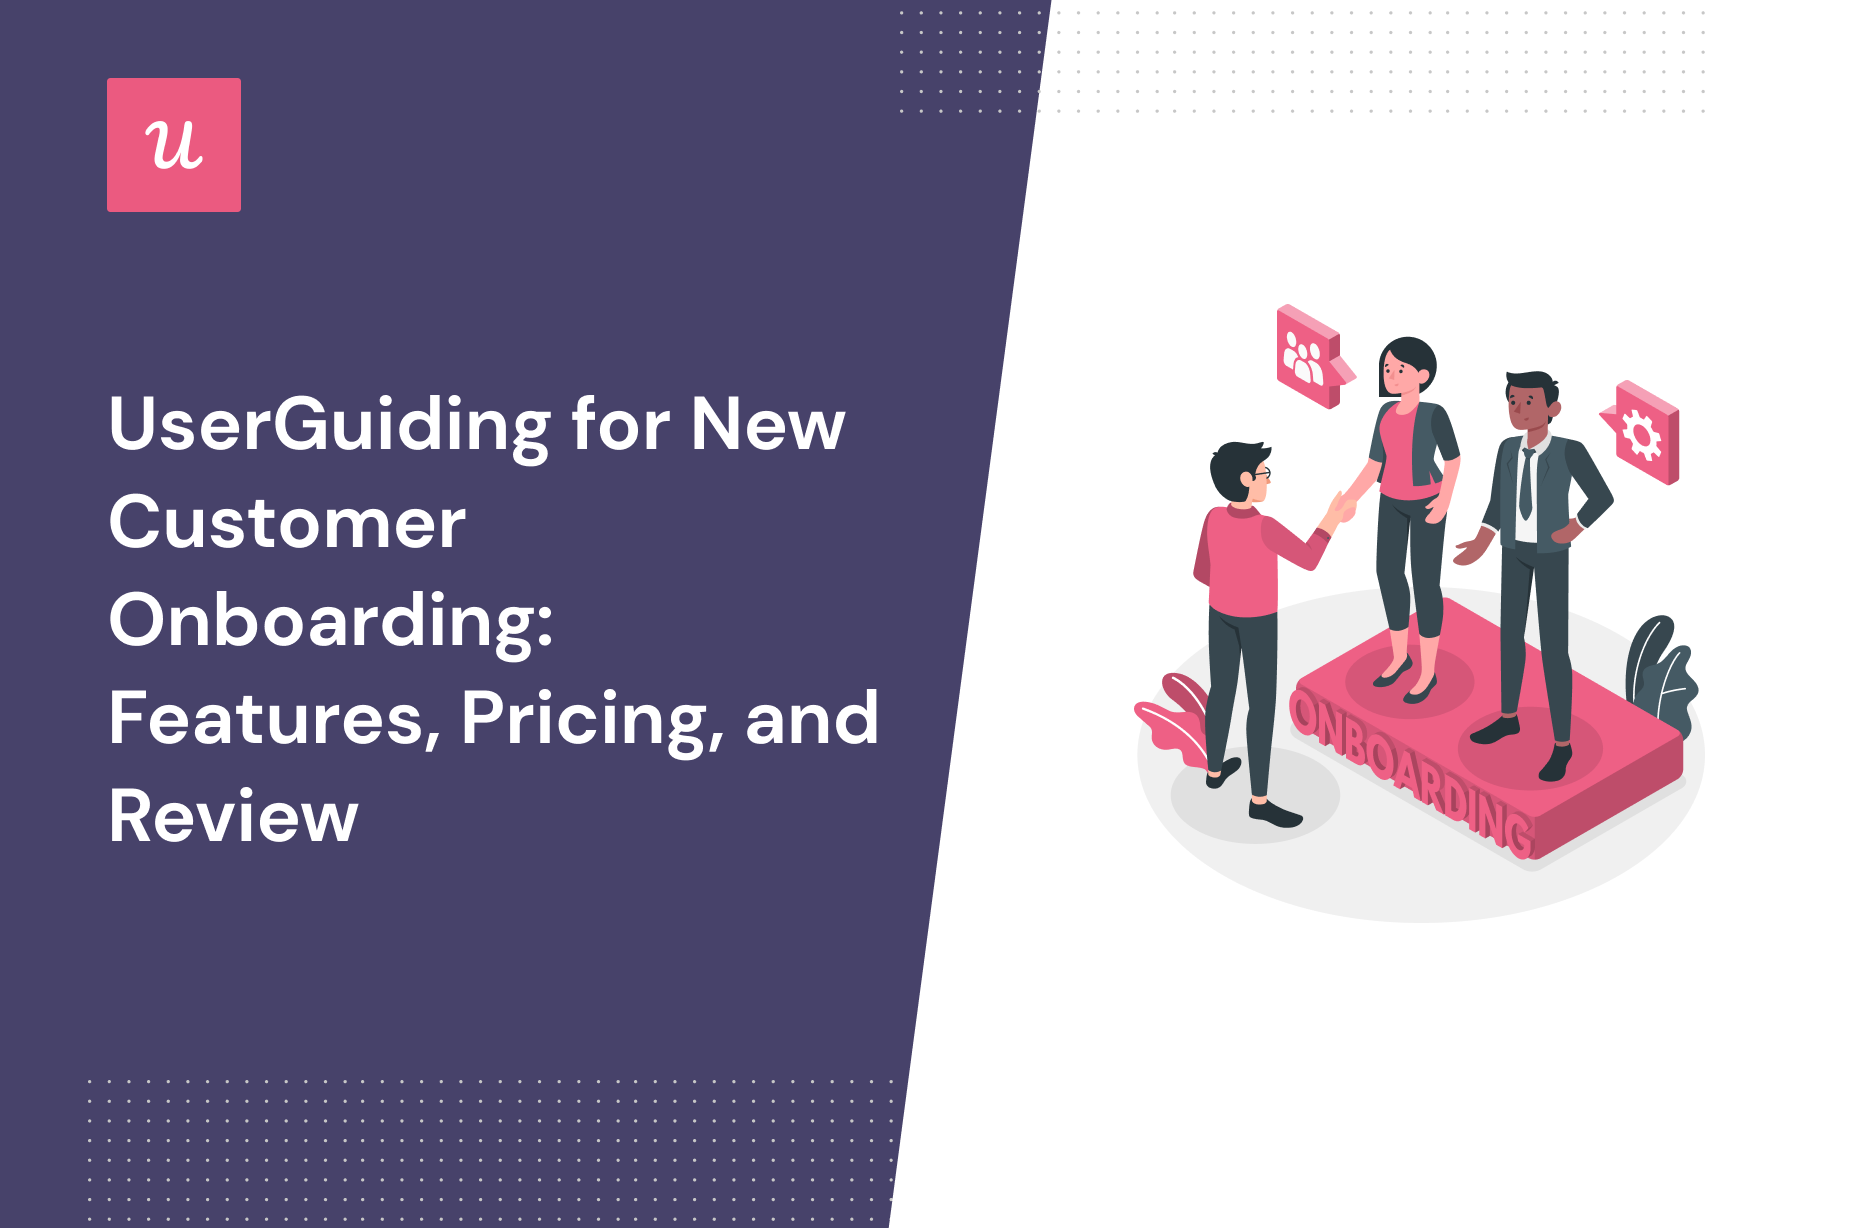 UserGuiding for New Customer Onboarding: Features, Pricing, and Review